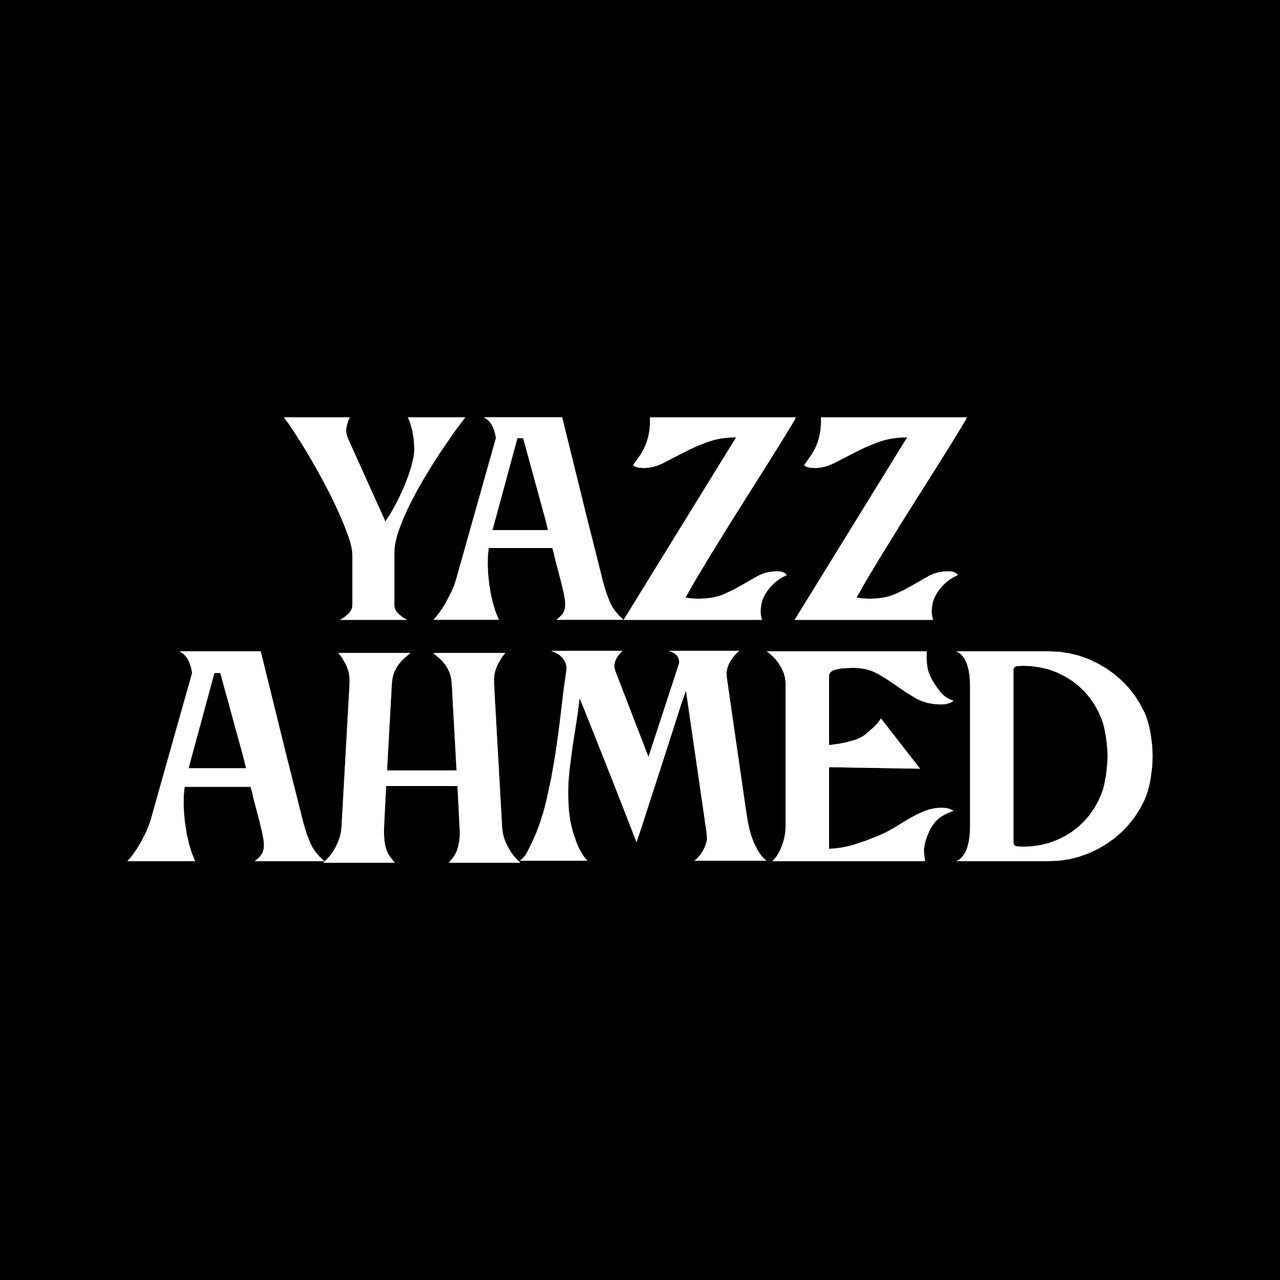 Artwork for Yazz Ahmed